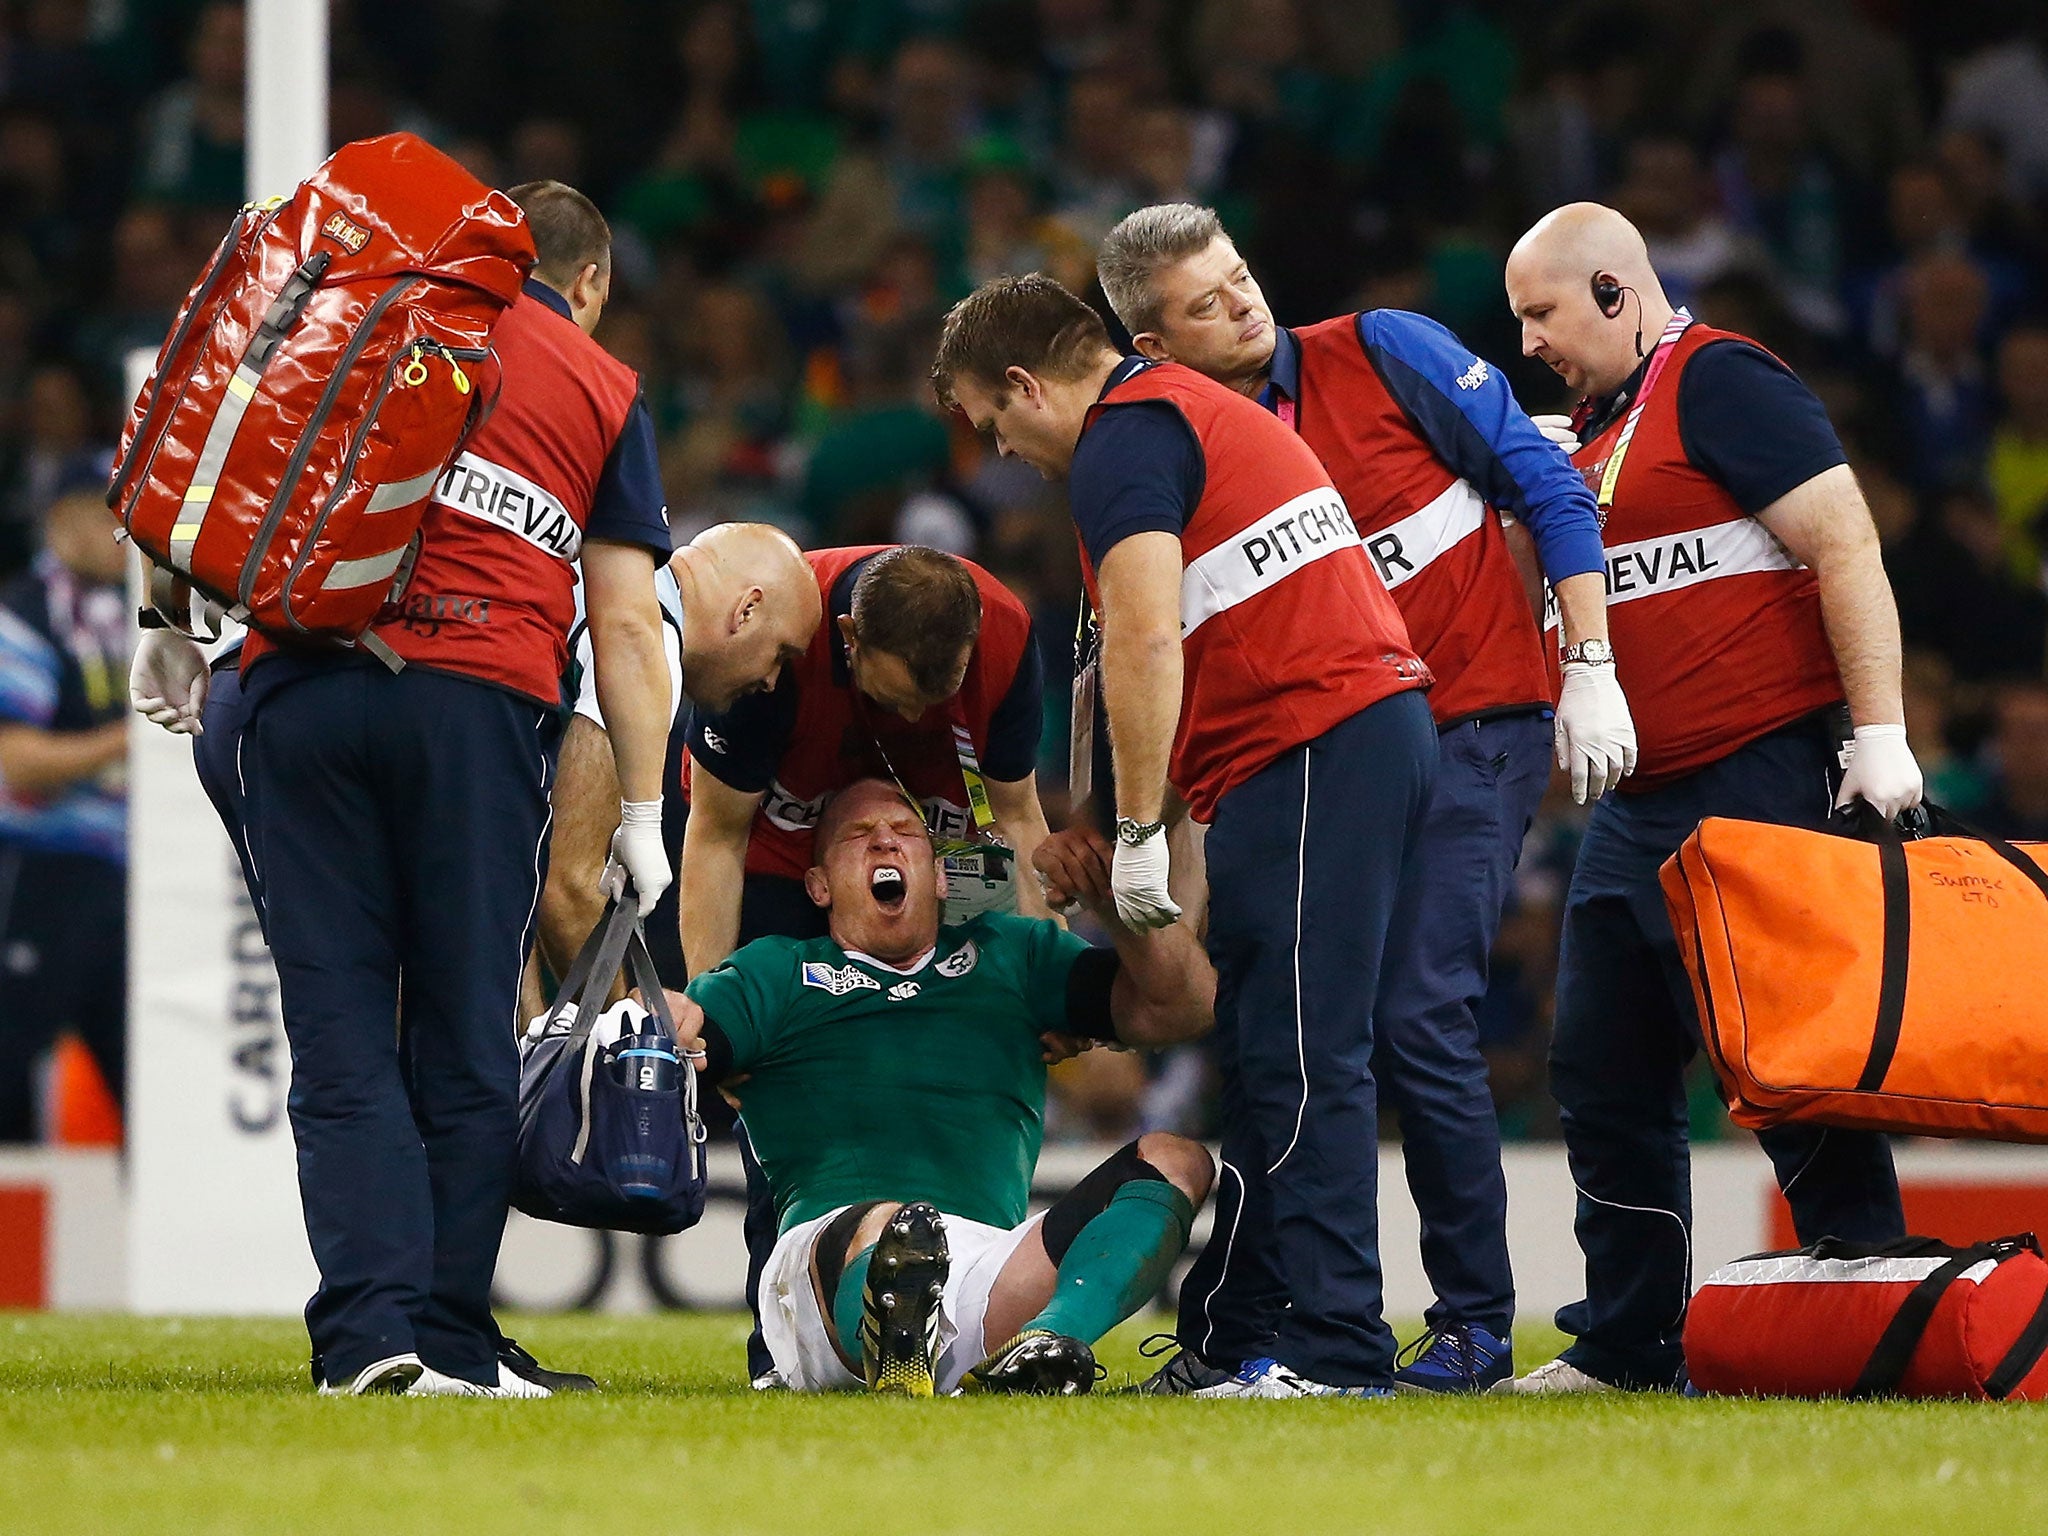 Paul O'Connell winces in agony after suffering a serious knee injury